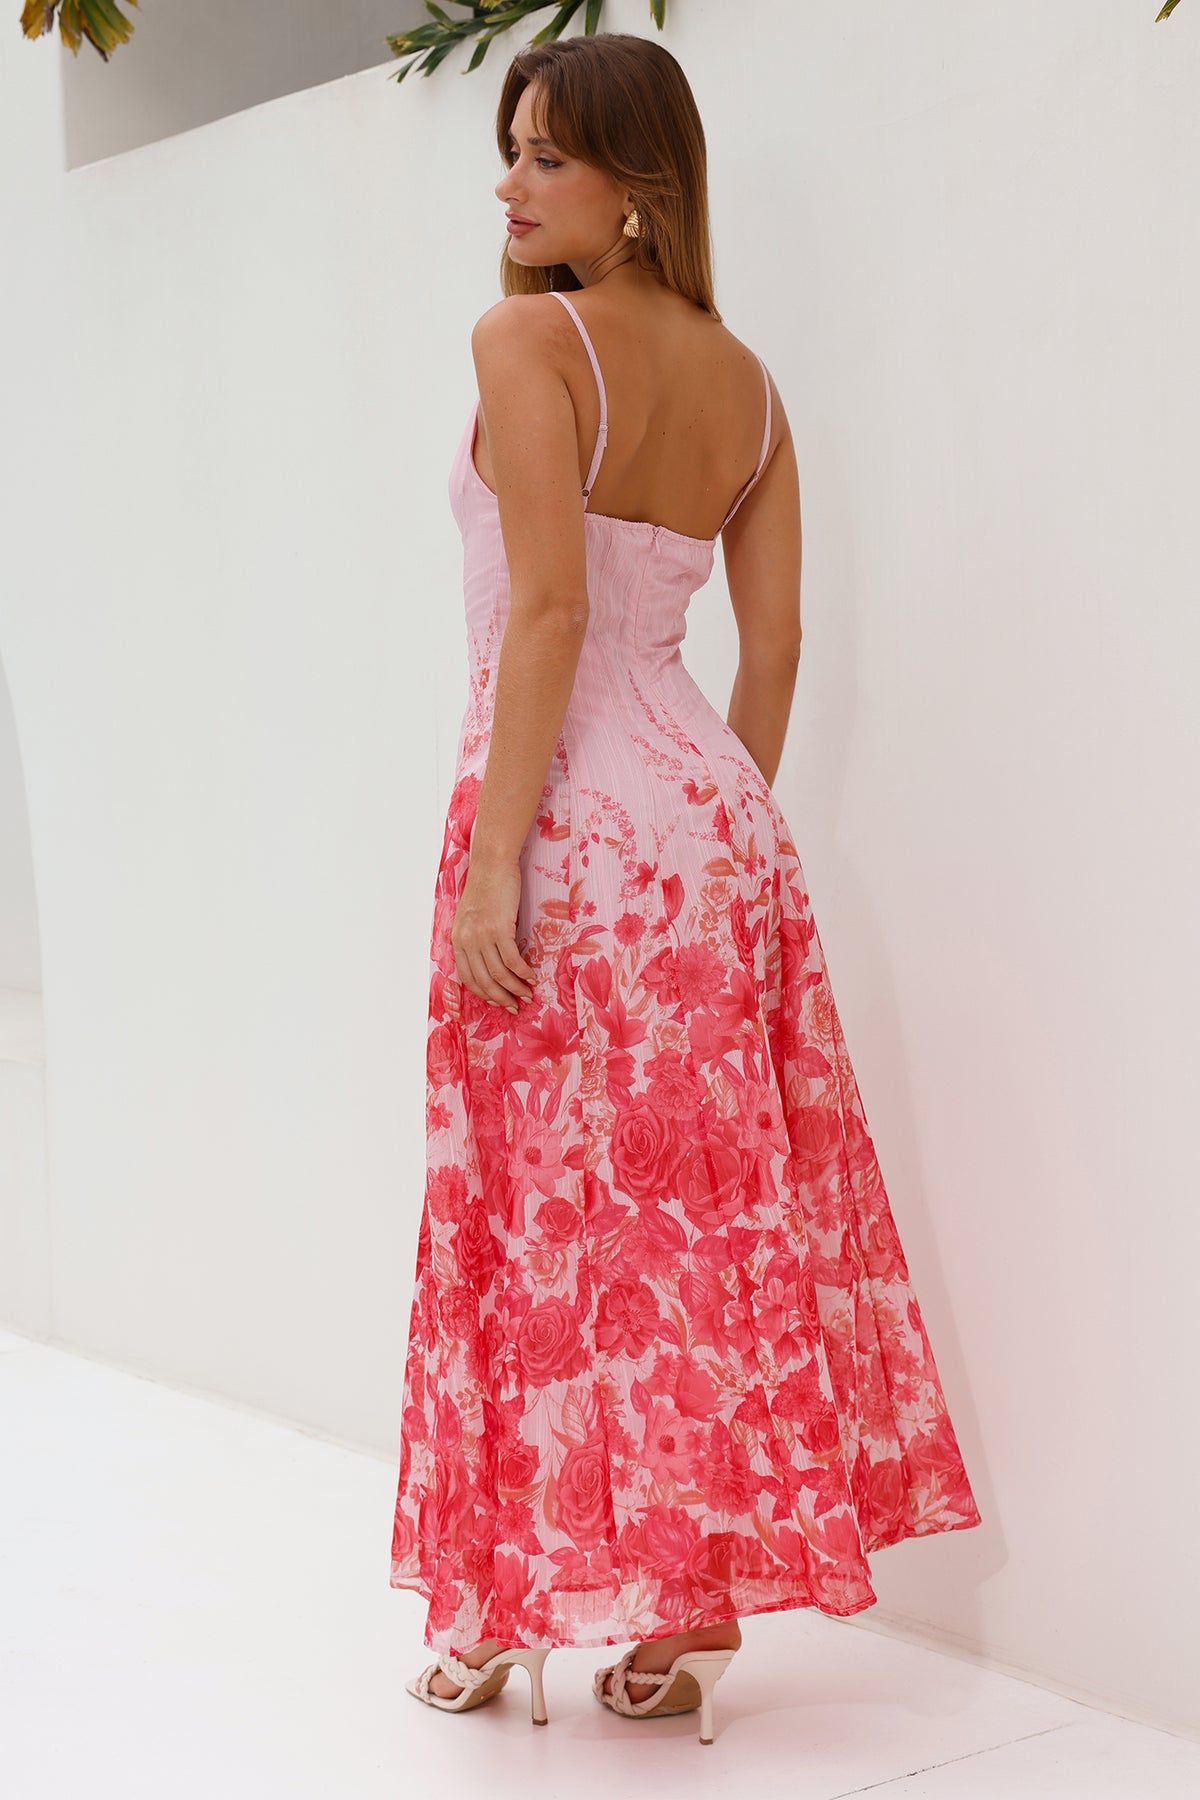 Shop Formal Dress - Raise The Roof Maxi Dress Pink sixth image